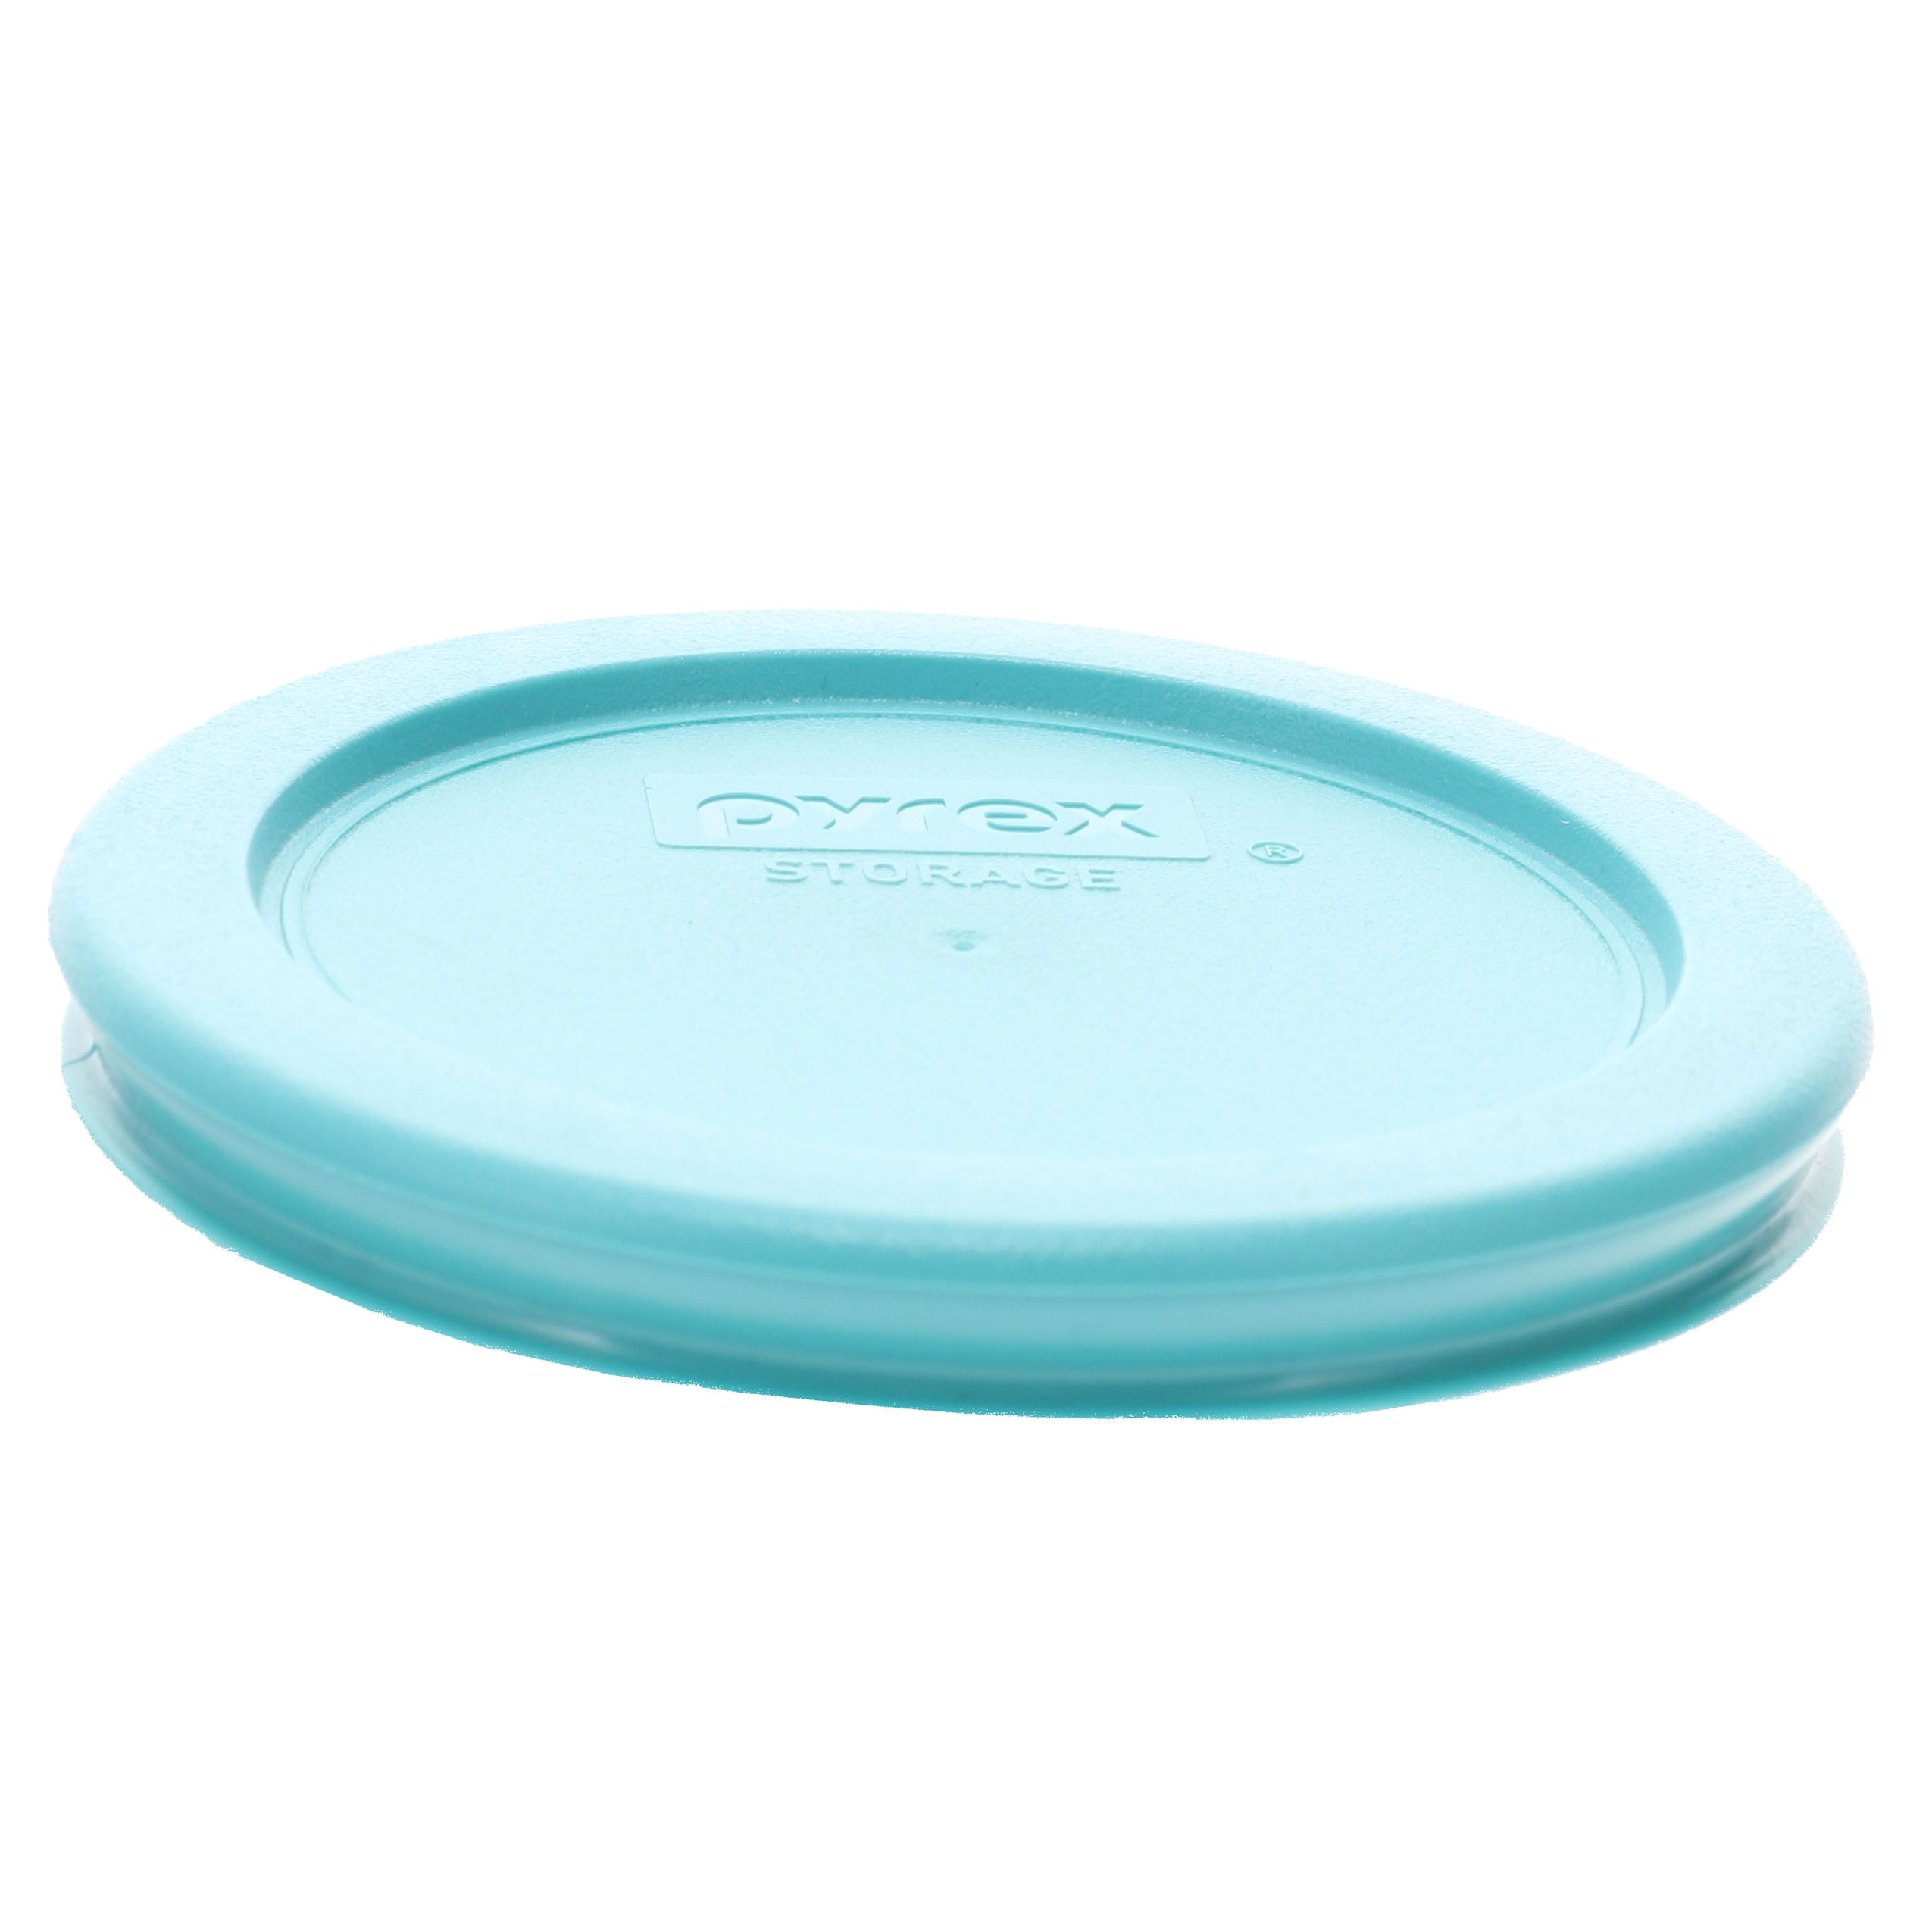 6-pack Pyrex 7202-PC 1 Cup Turquoise Plastic Replacement Storage Lid Covers 